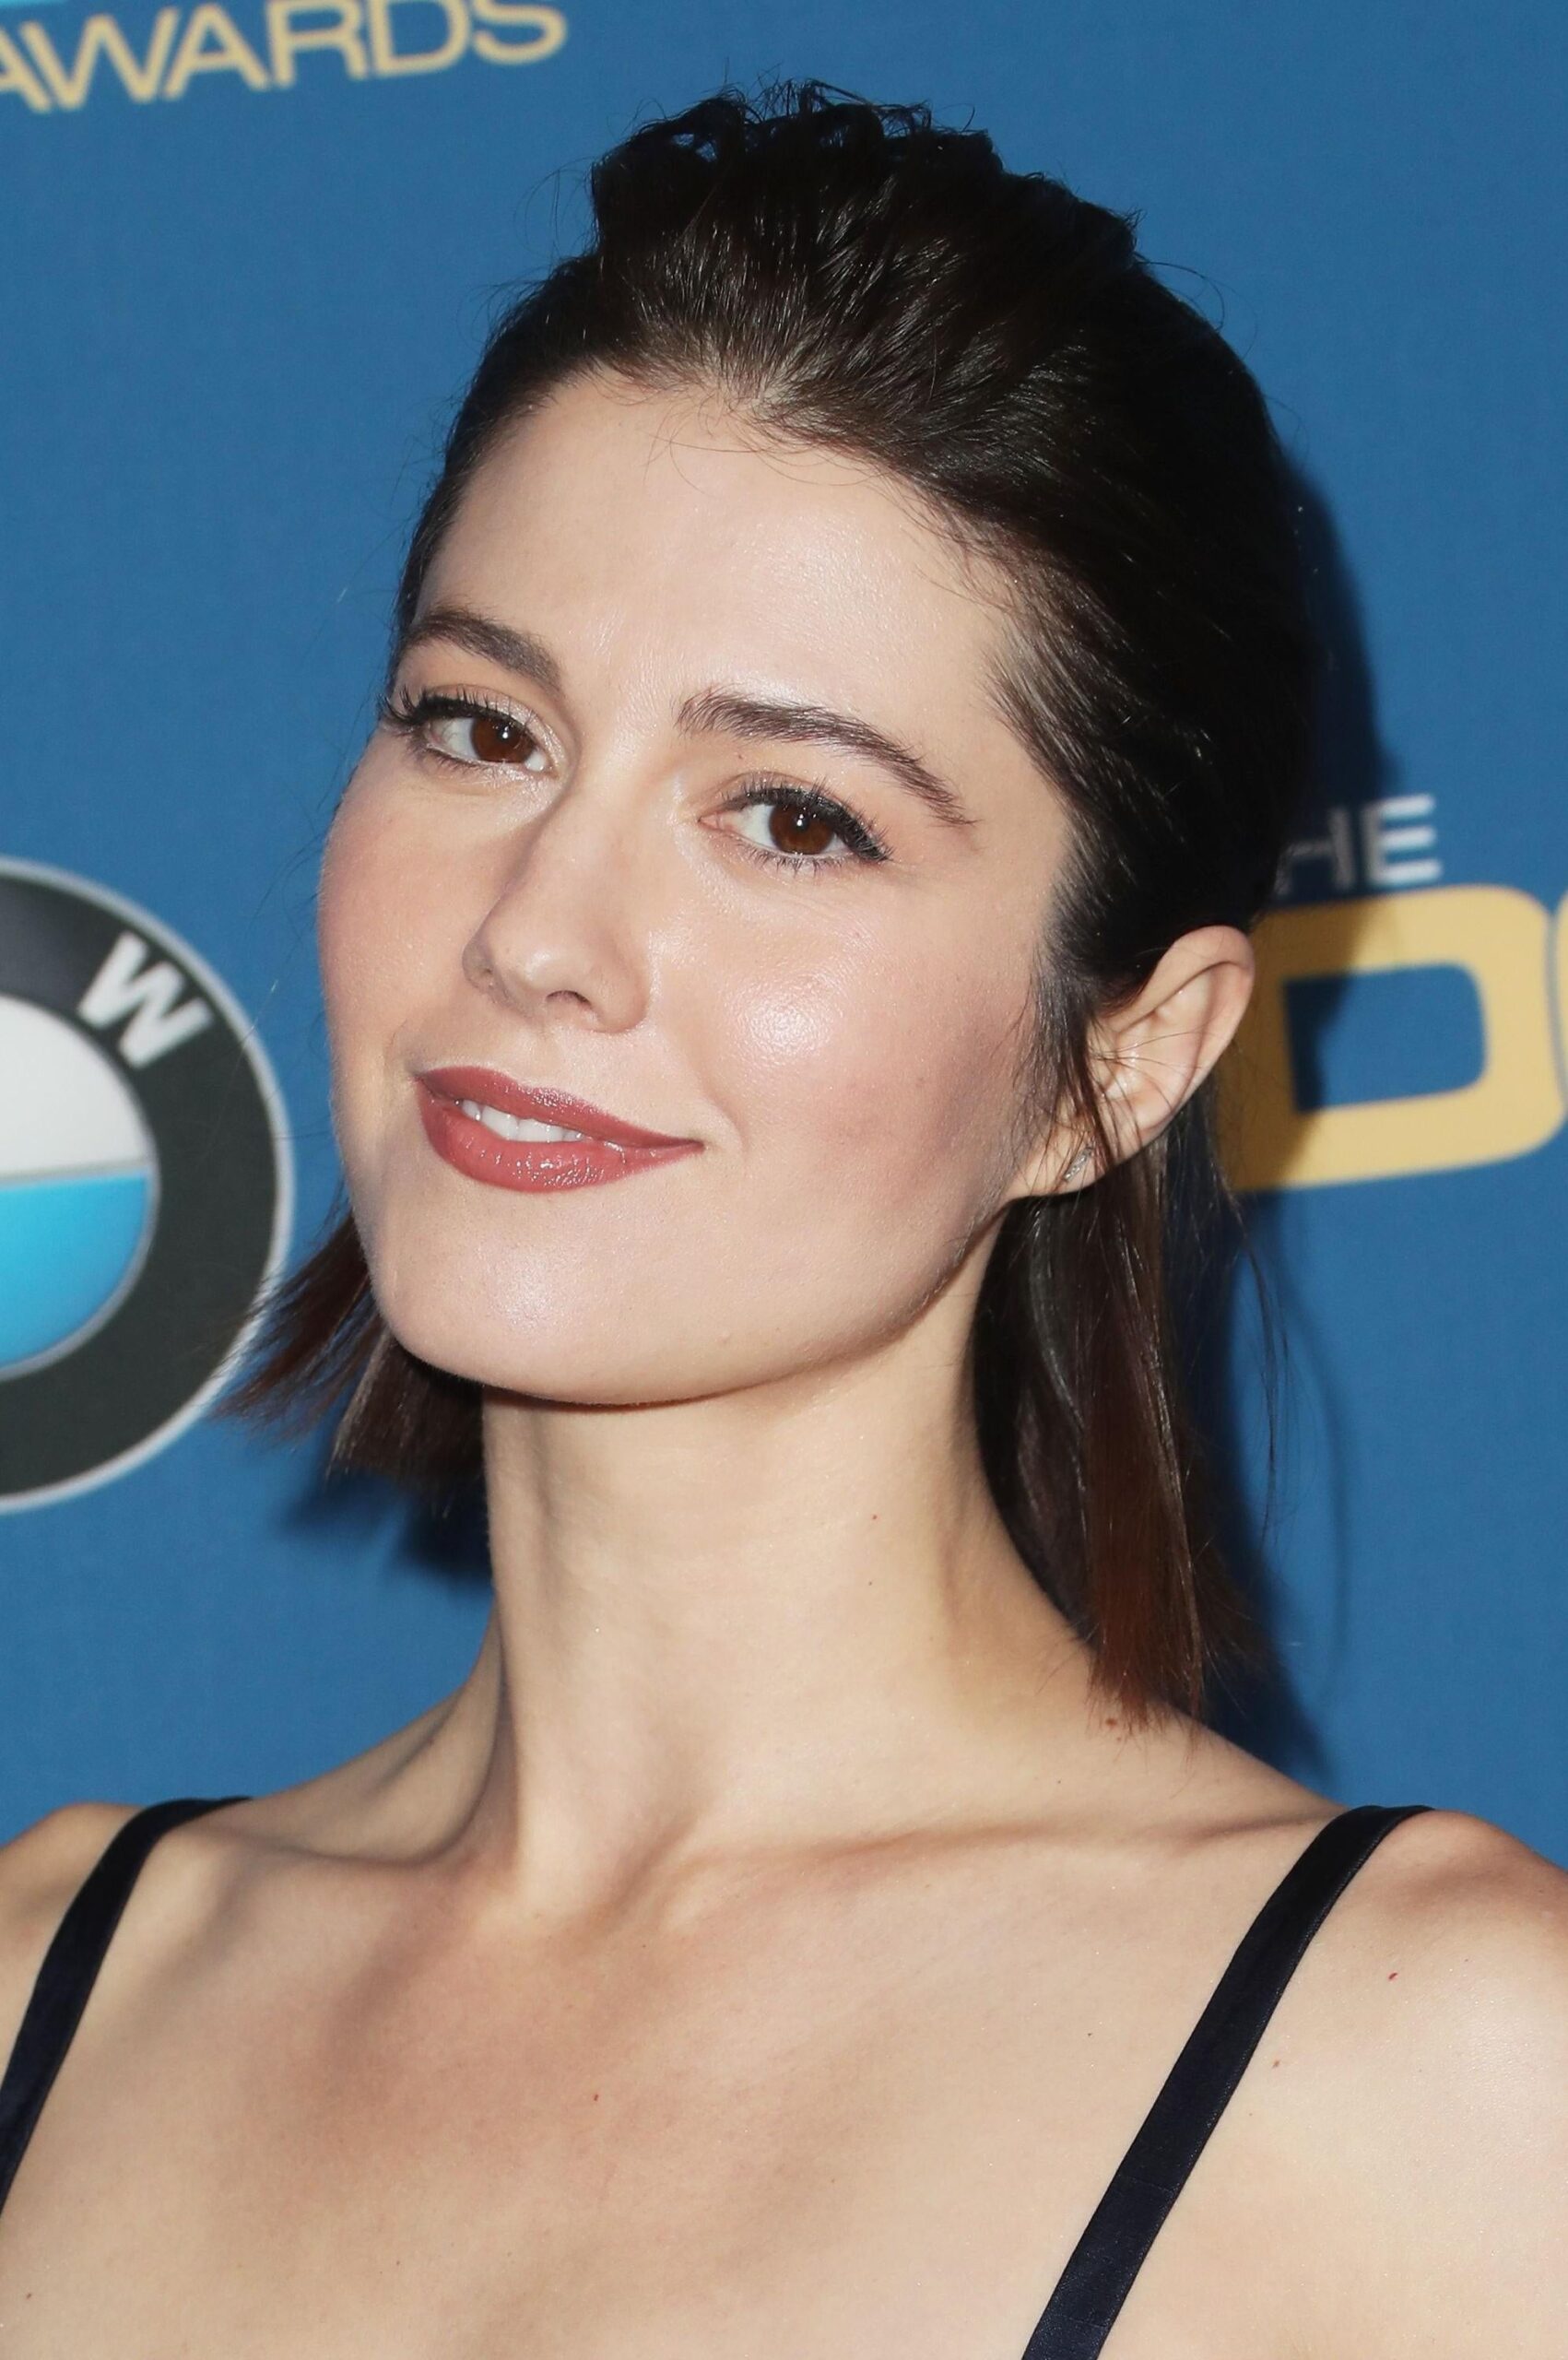 How would you fuck Mary Elizabeth Winstead